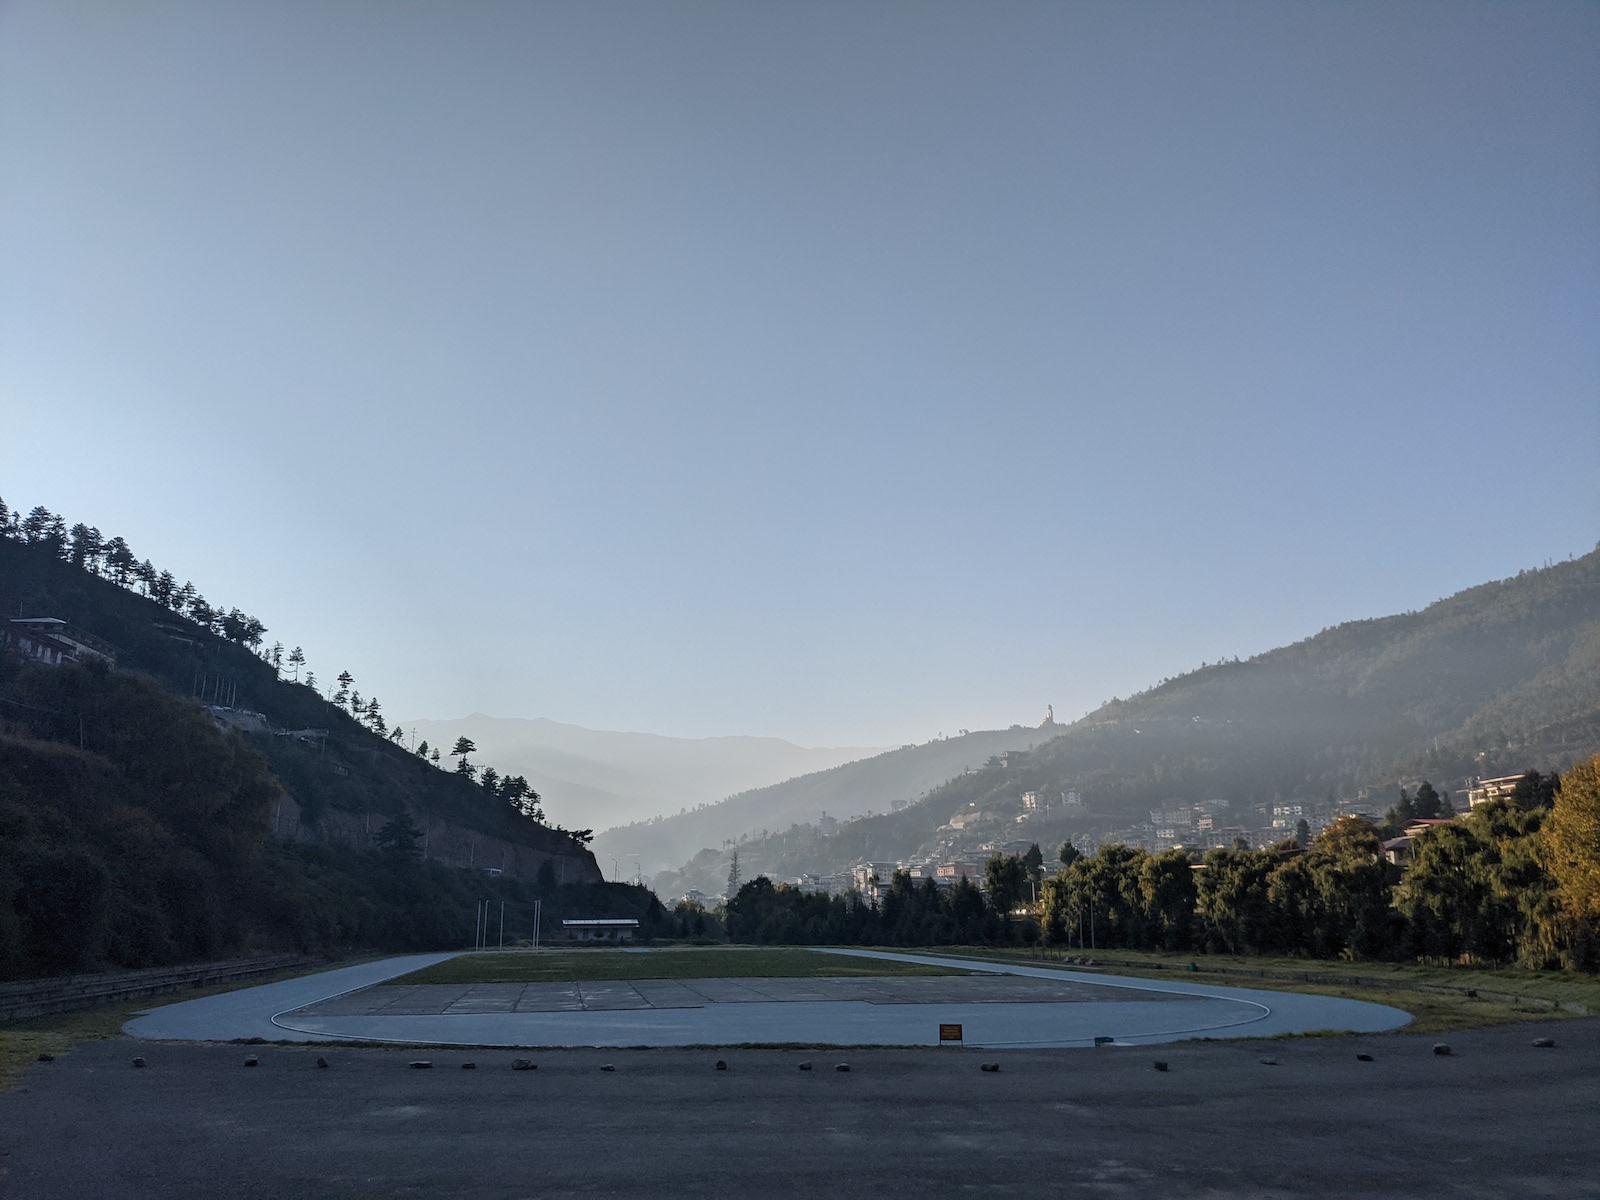 One official track exists in the capital, Thimphu. I was granted access to train there and with other dedicated Bhutanese athletes. This track provided an excellent training ground for steady state, lactate threshold, and VO2 max workouts.